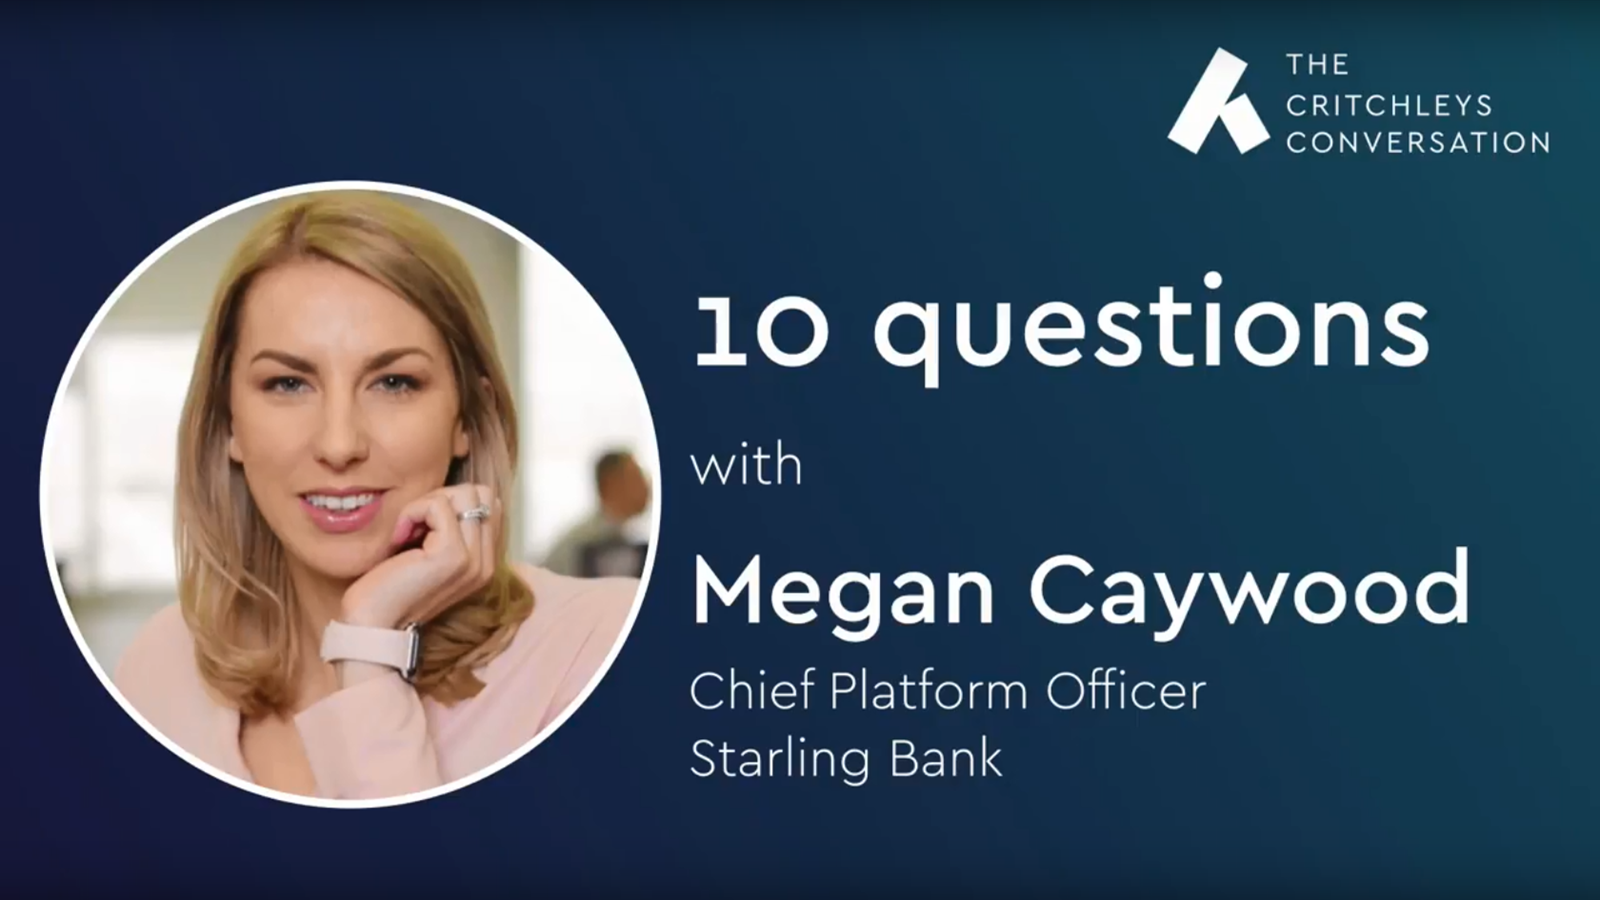 INNOVATION: Q&A with Megan Caywood, Chief Platform Officer at Starling Bank